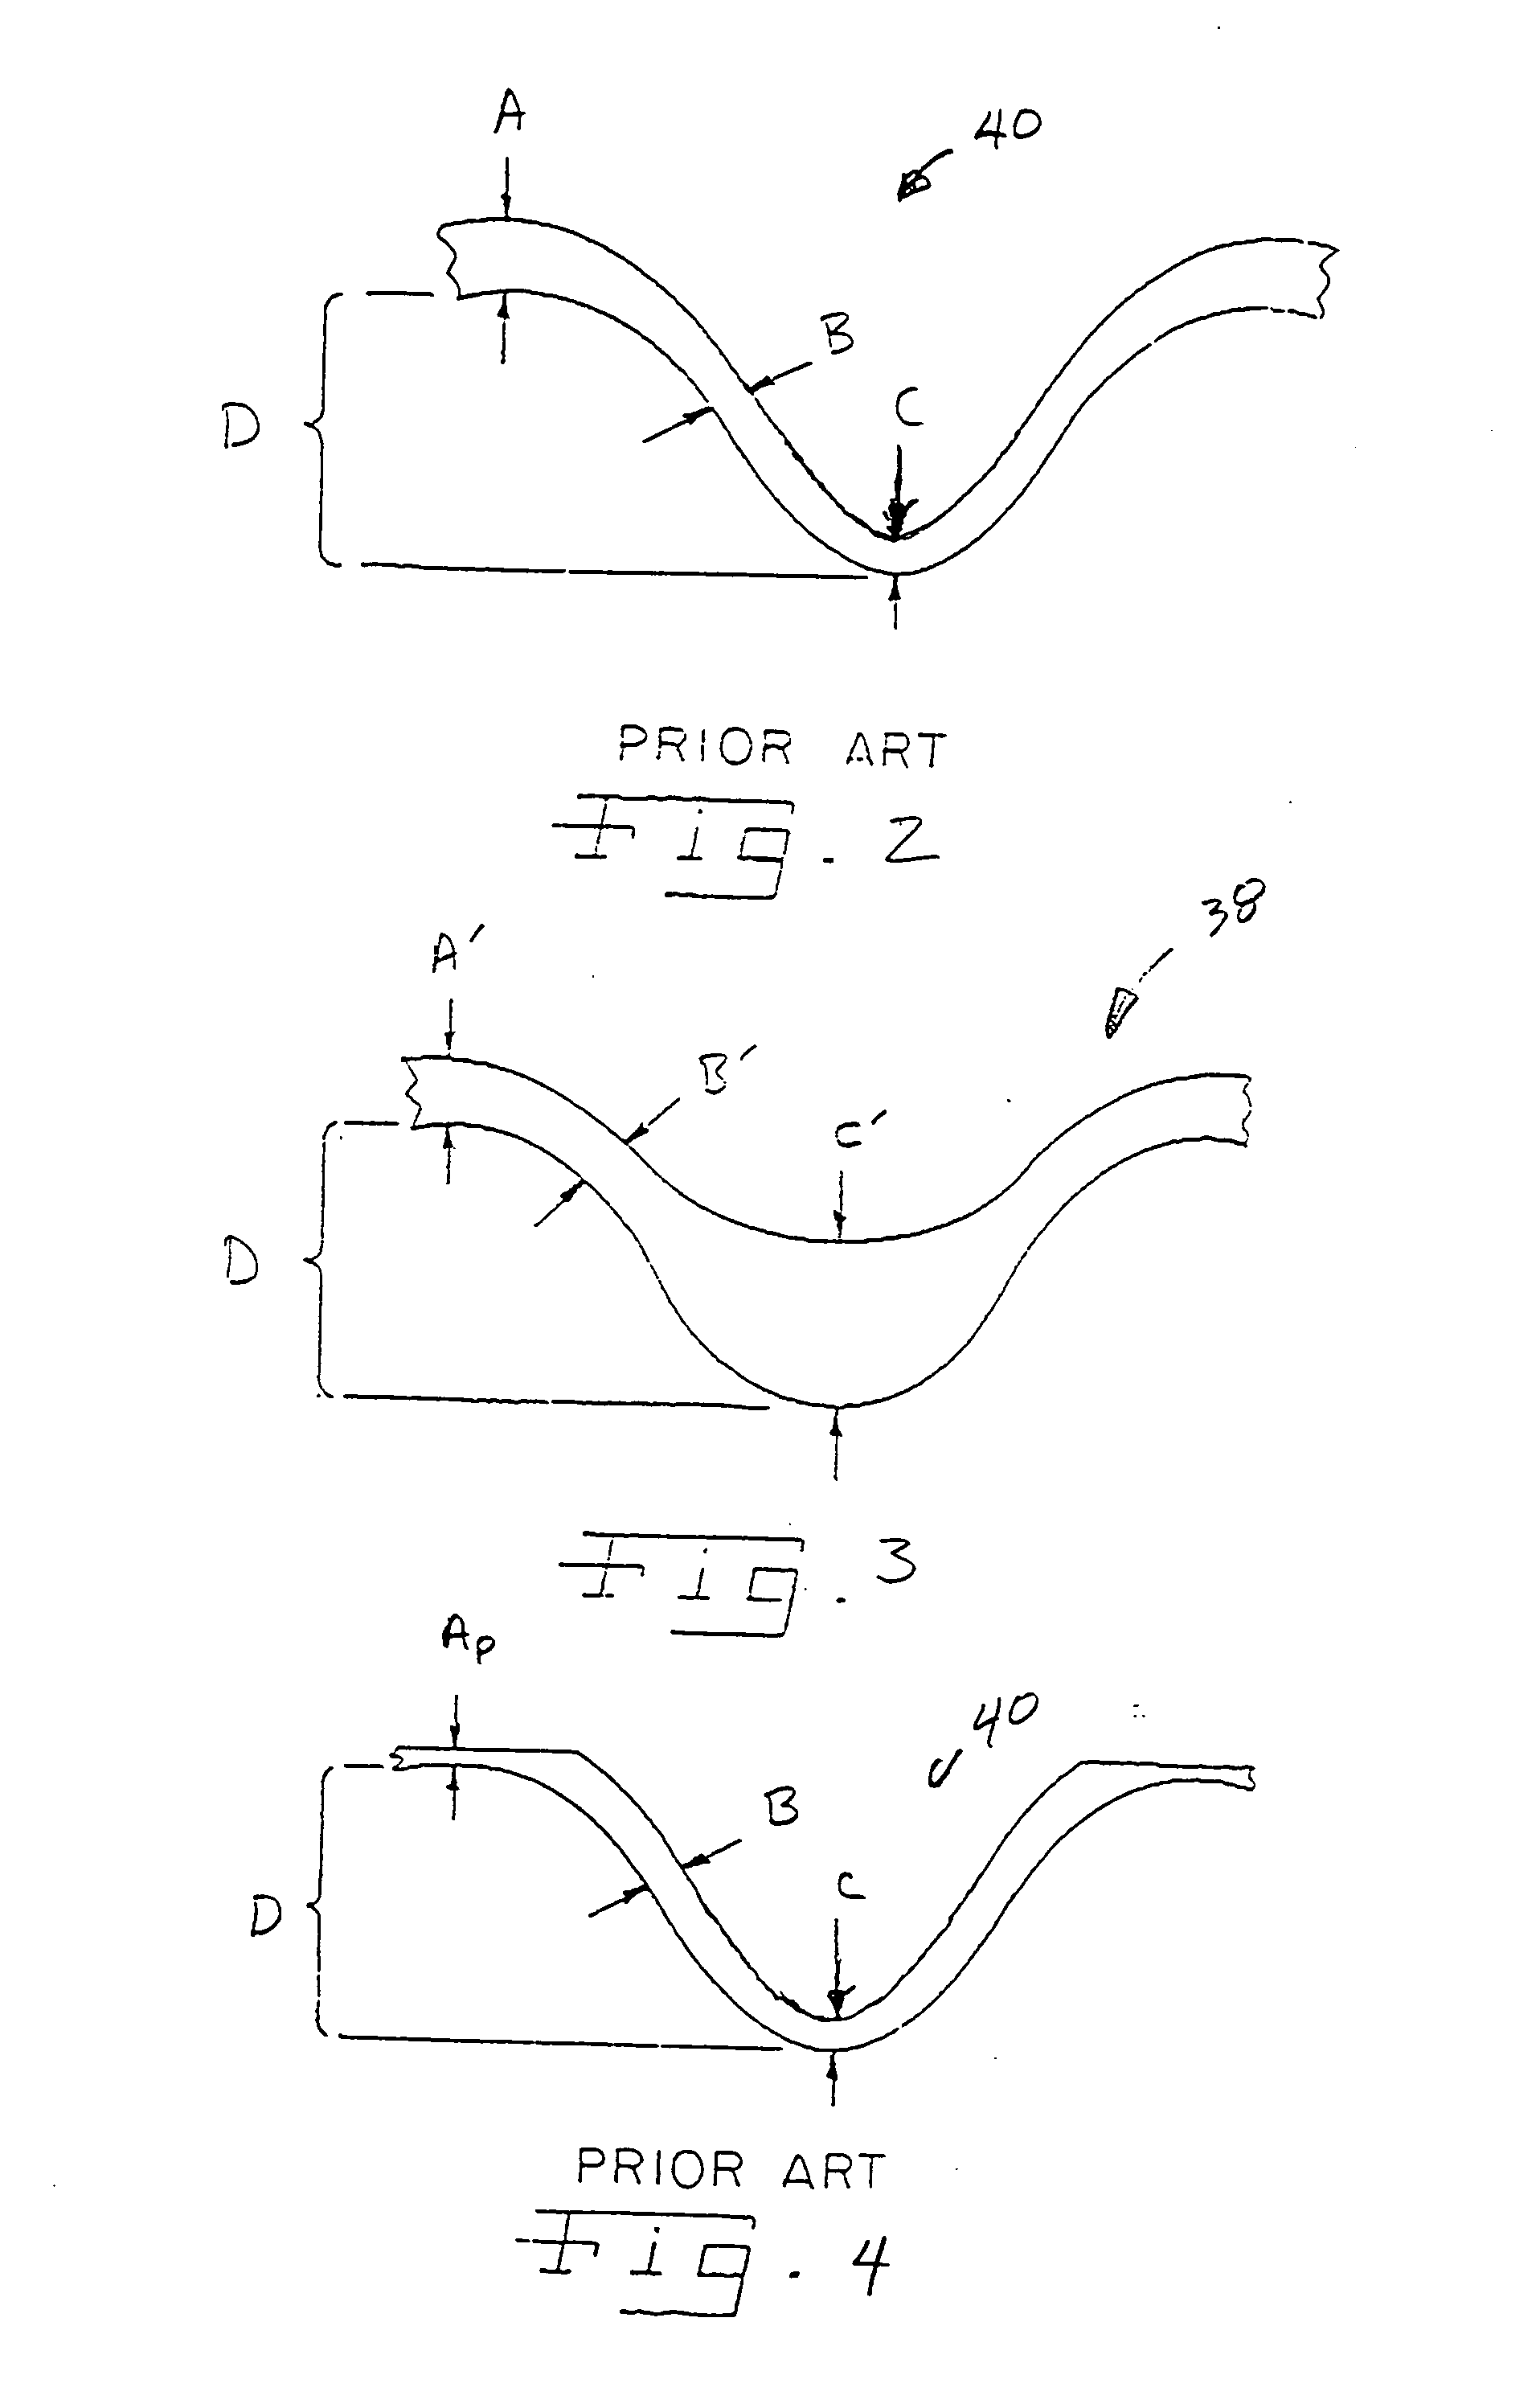 Apparatus for and process of material web formation on a structured fabric in a paper machine